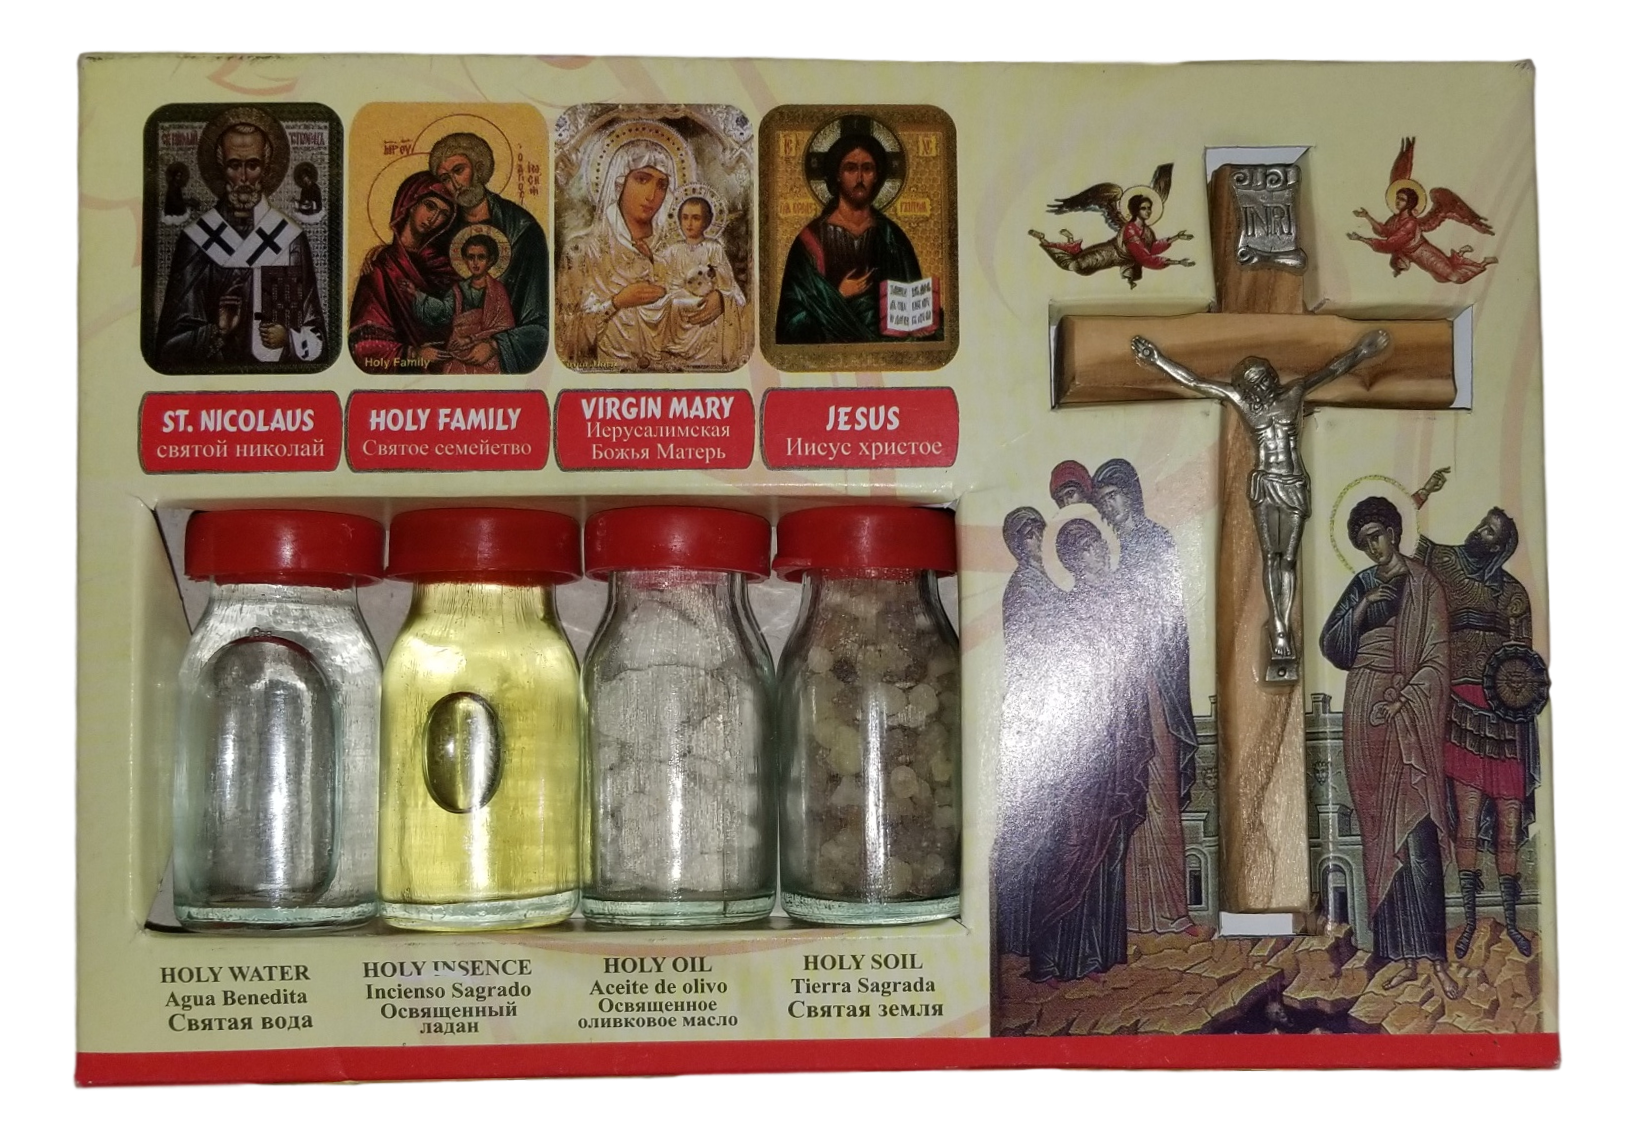 Holy water, Holy Oil, Stones, and Soil boxes